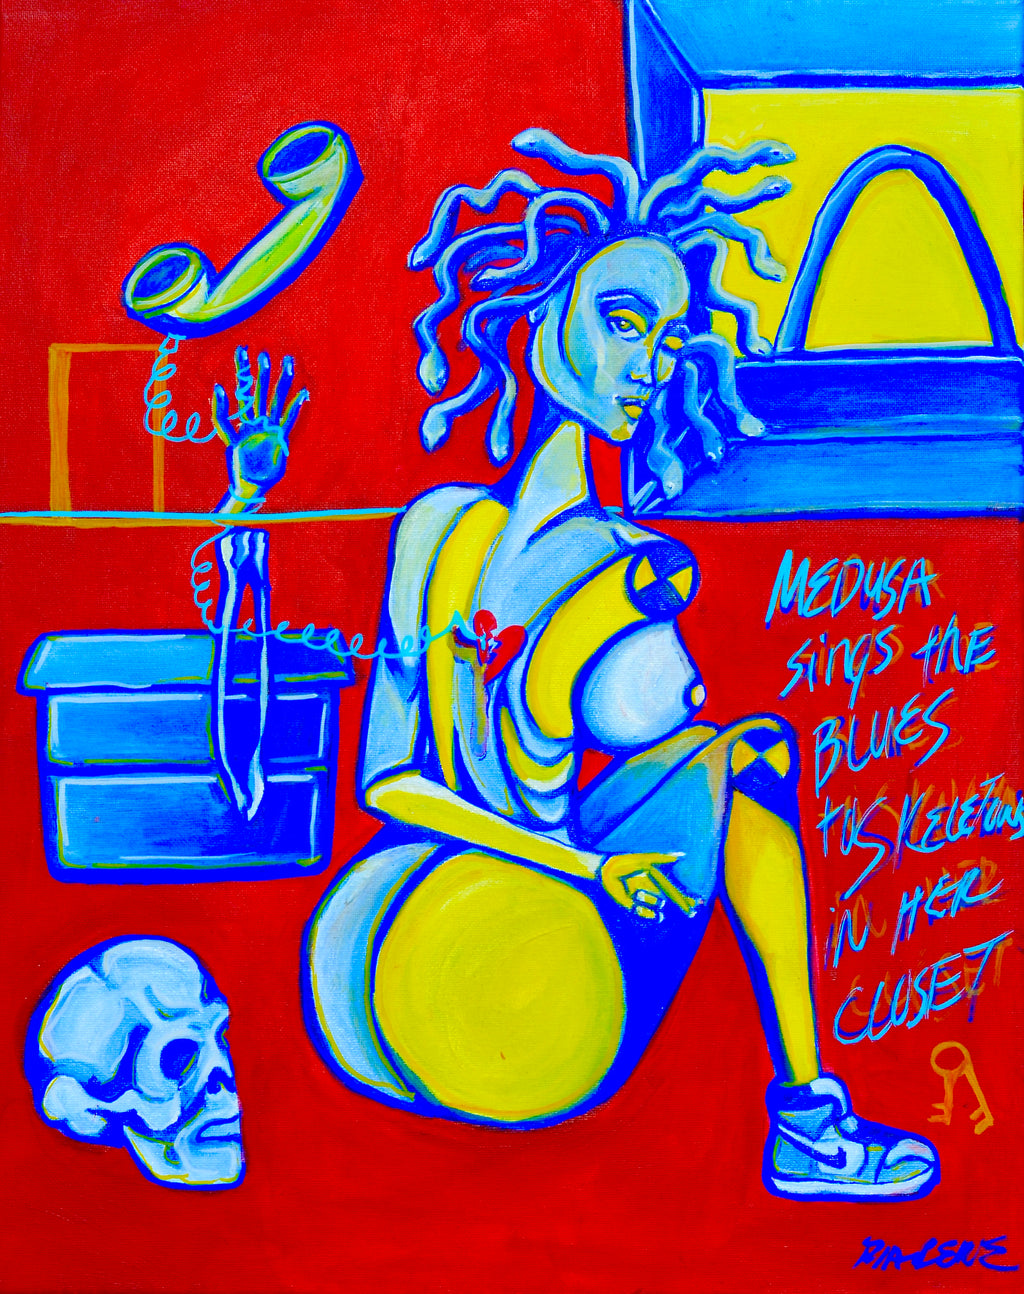 Medusa Sings The Blues to Skeletons In Her Closet Print